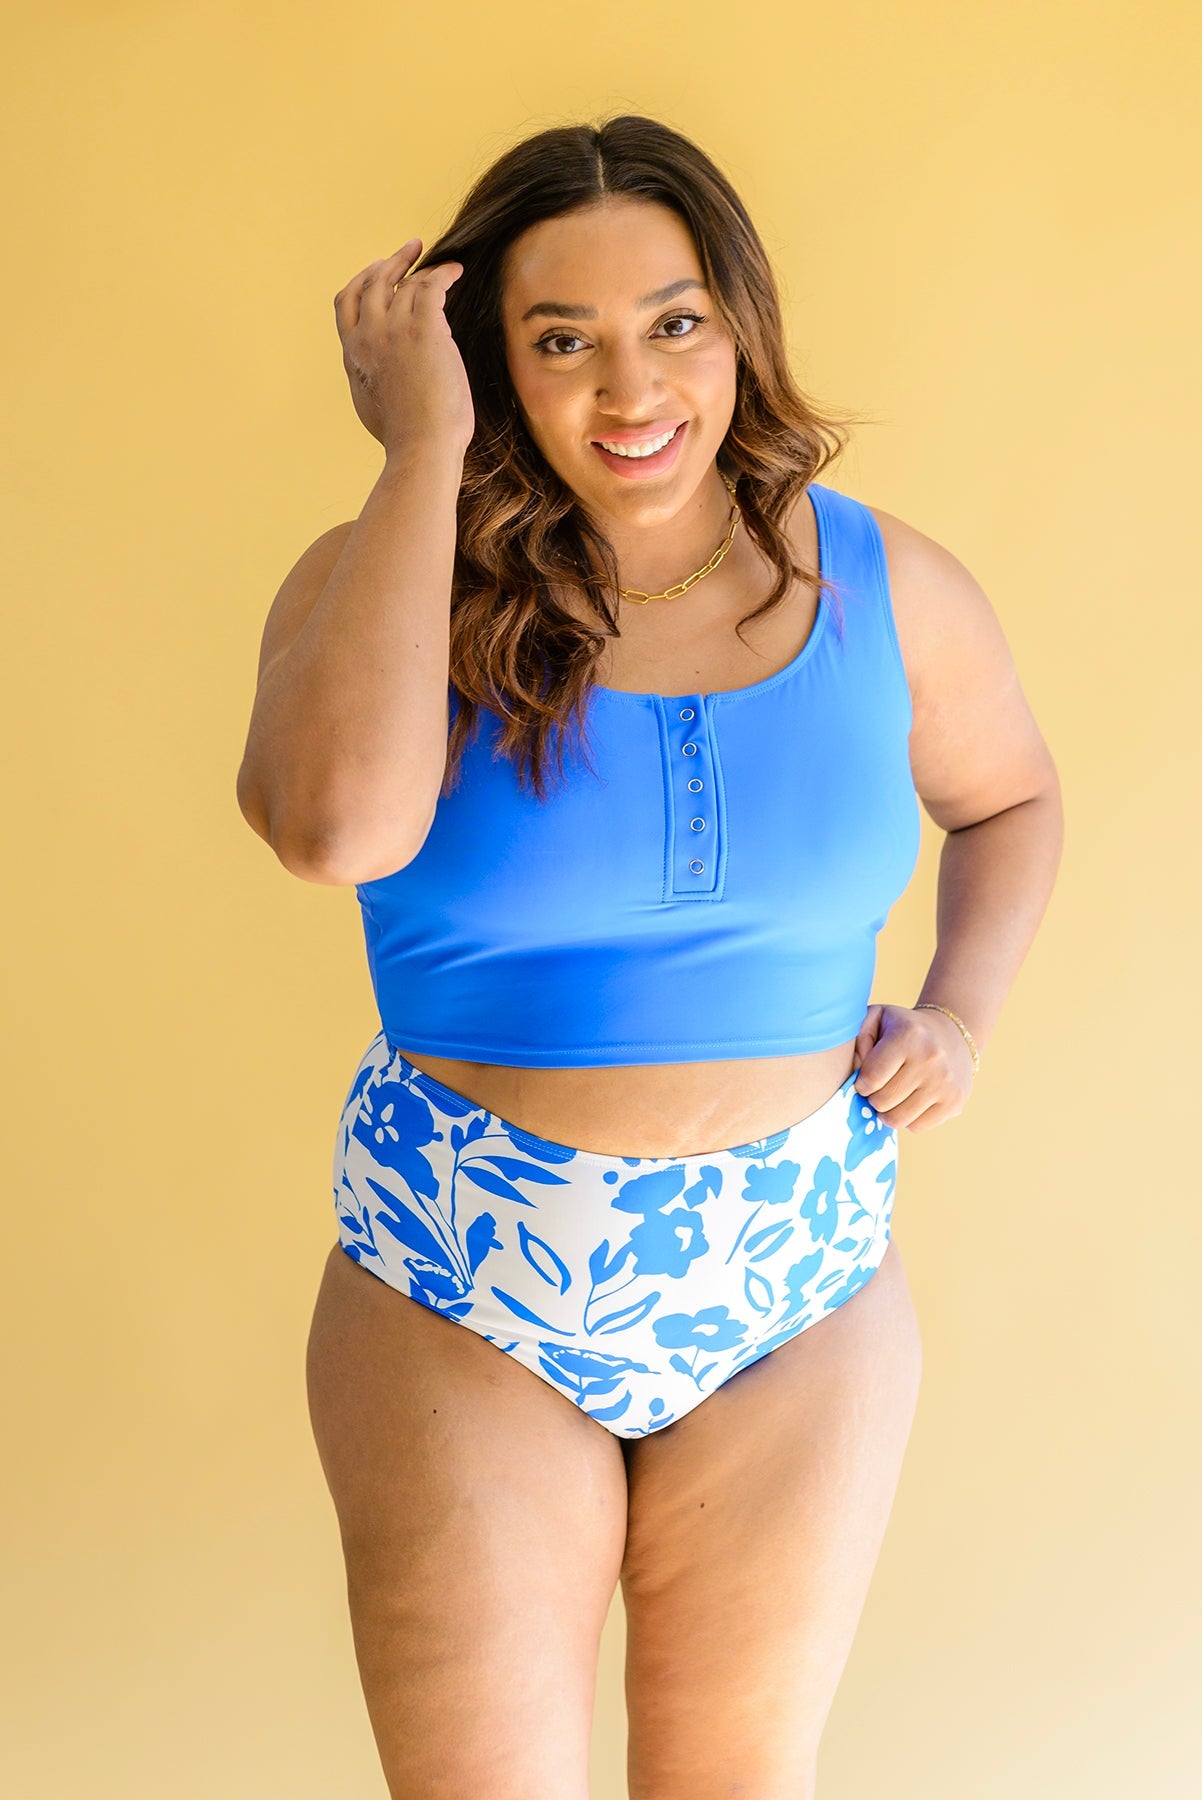 Bermuda Floral Two Piece Swimsuit - Blue - Free Shipping On Orders Over $75